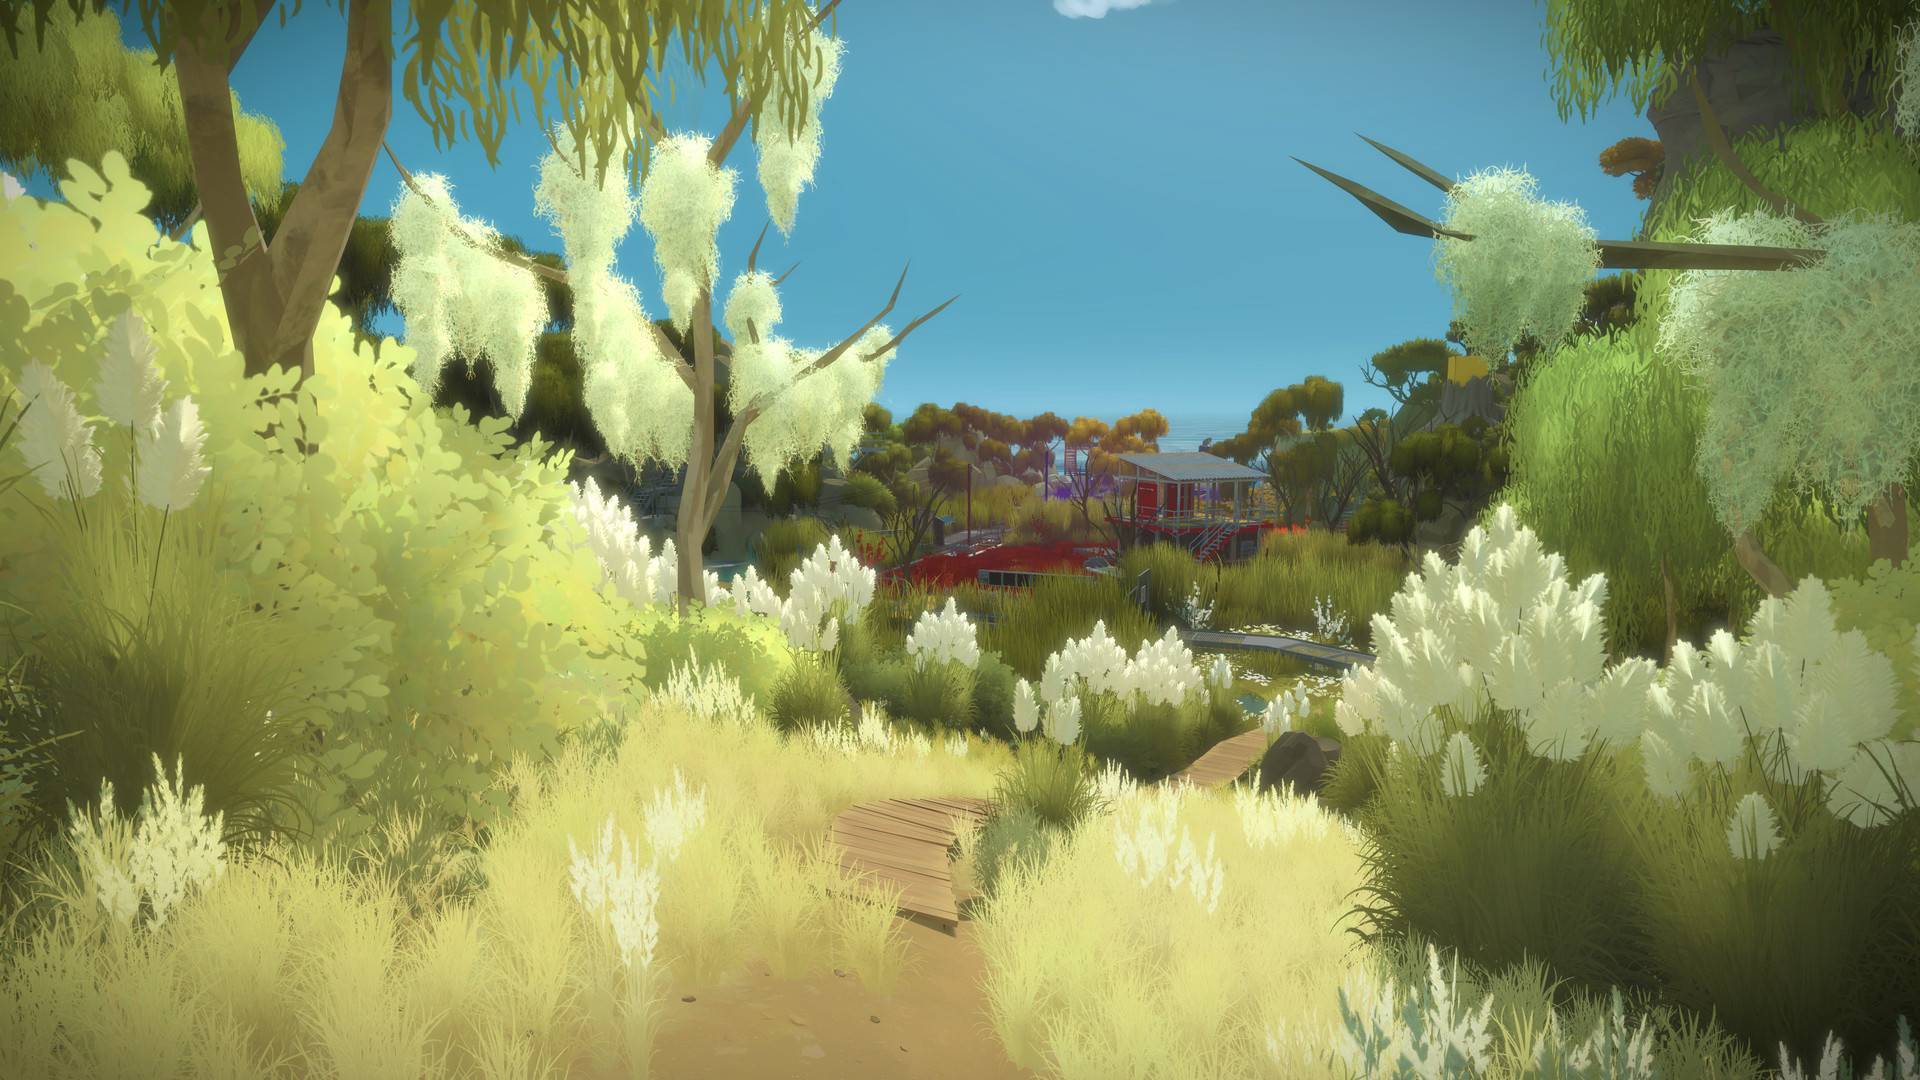 The Witness (PS4) cheap Price $8.54